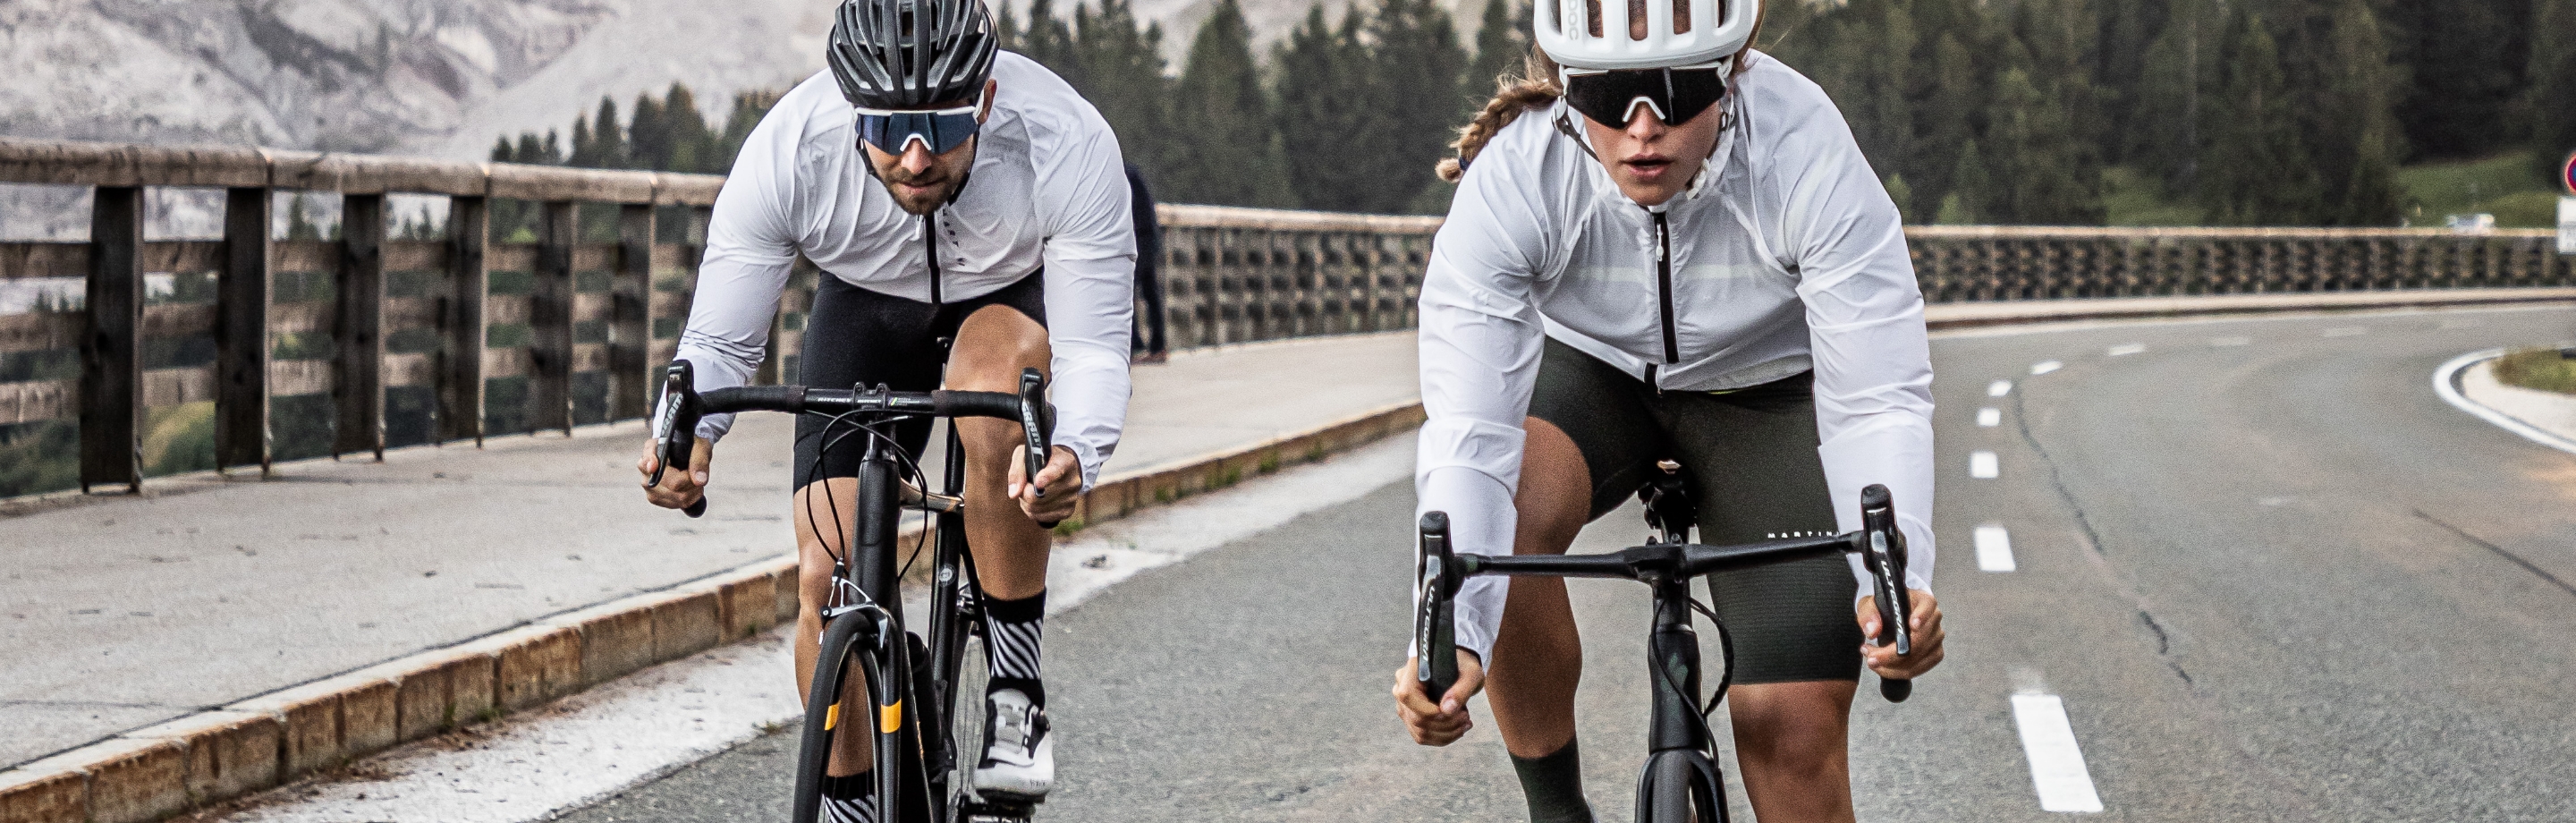 Martini – Sportswear for cyclists, runners and outdoor enthusiasts 